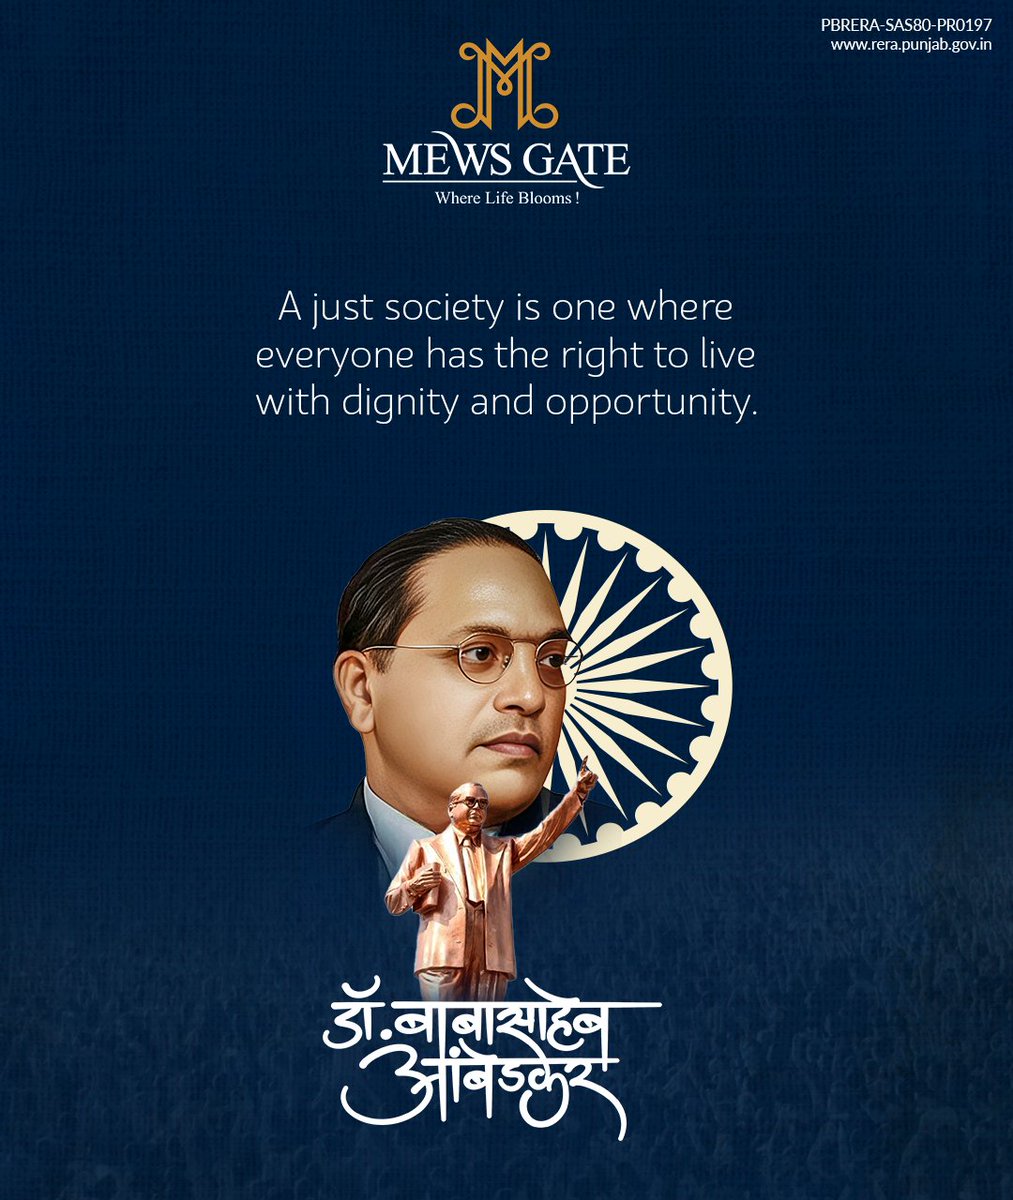 On this B.R. Ambedkar Jayanti, let's pledge to uphold his ideals of dignity, equality, and social justice for all. #MewsGate #BRAmbedkarJayanti #SocialEquality #SocialActivism #Equality #SocialJustice #SocialReform #HumanRights #JusticeForAll